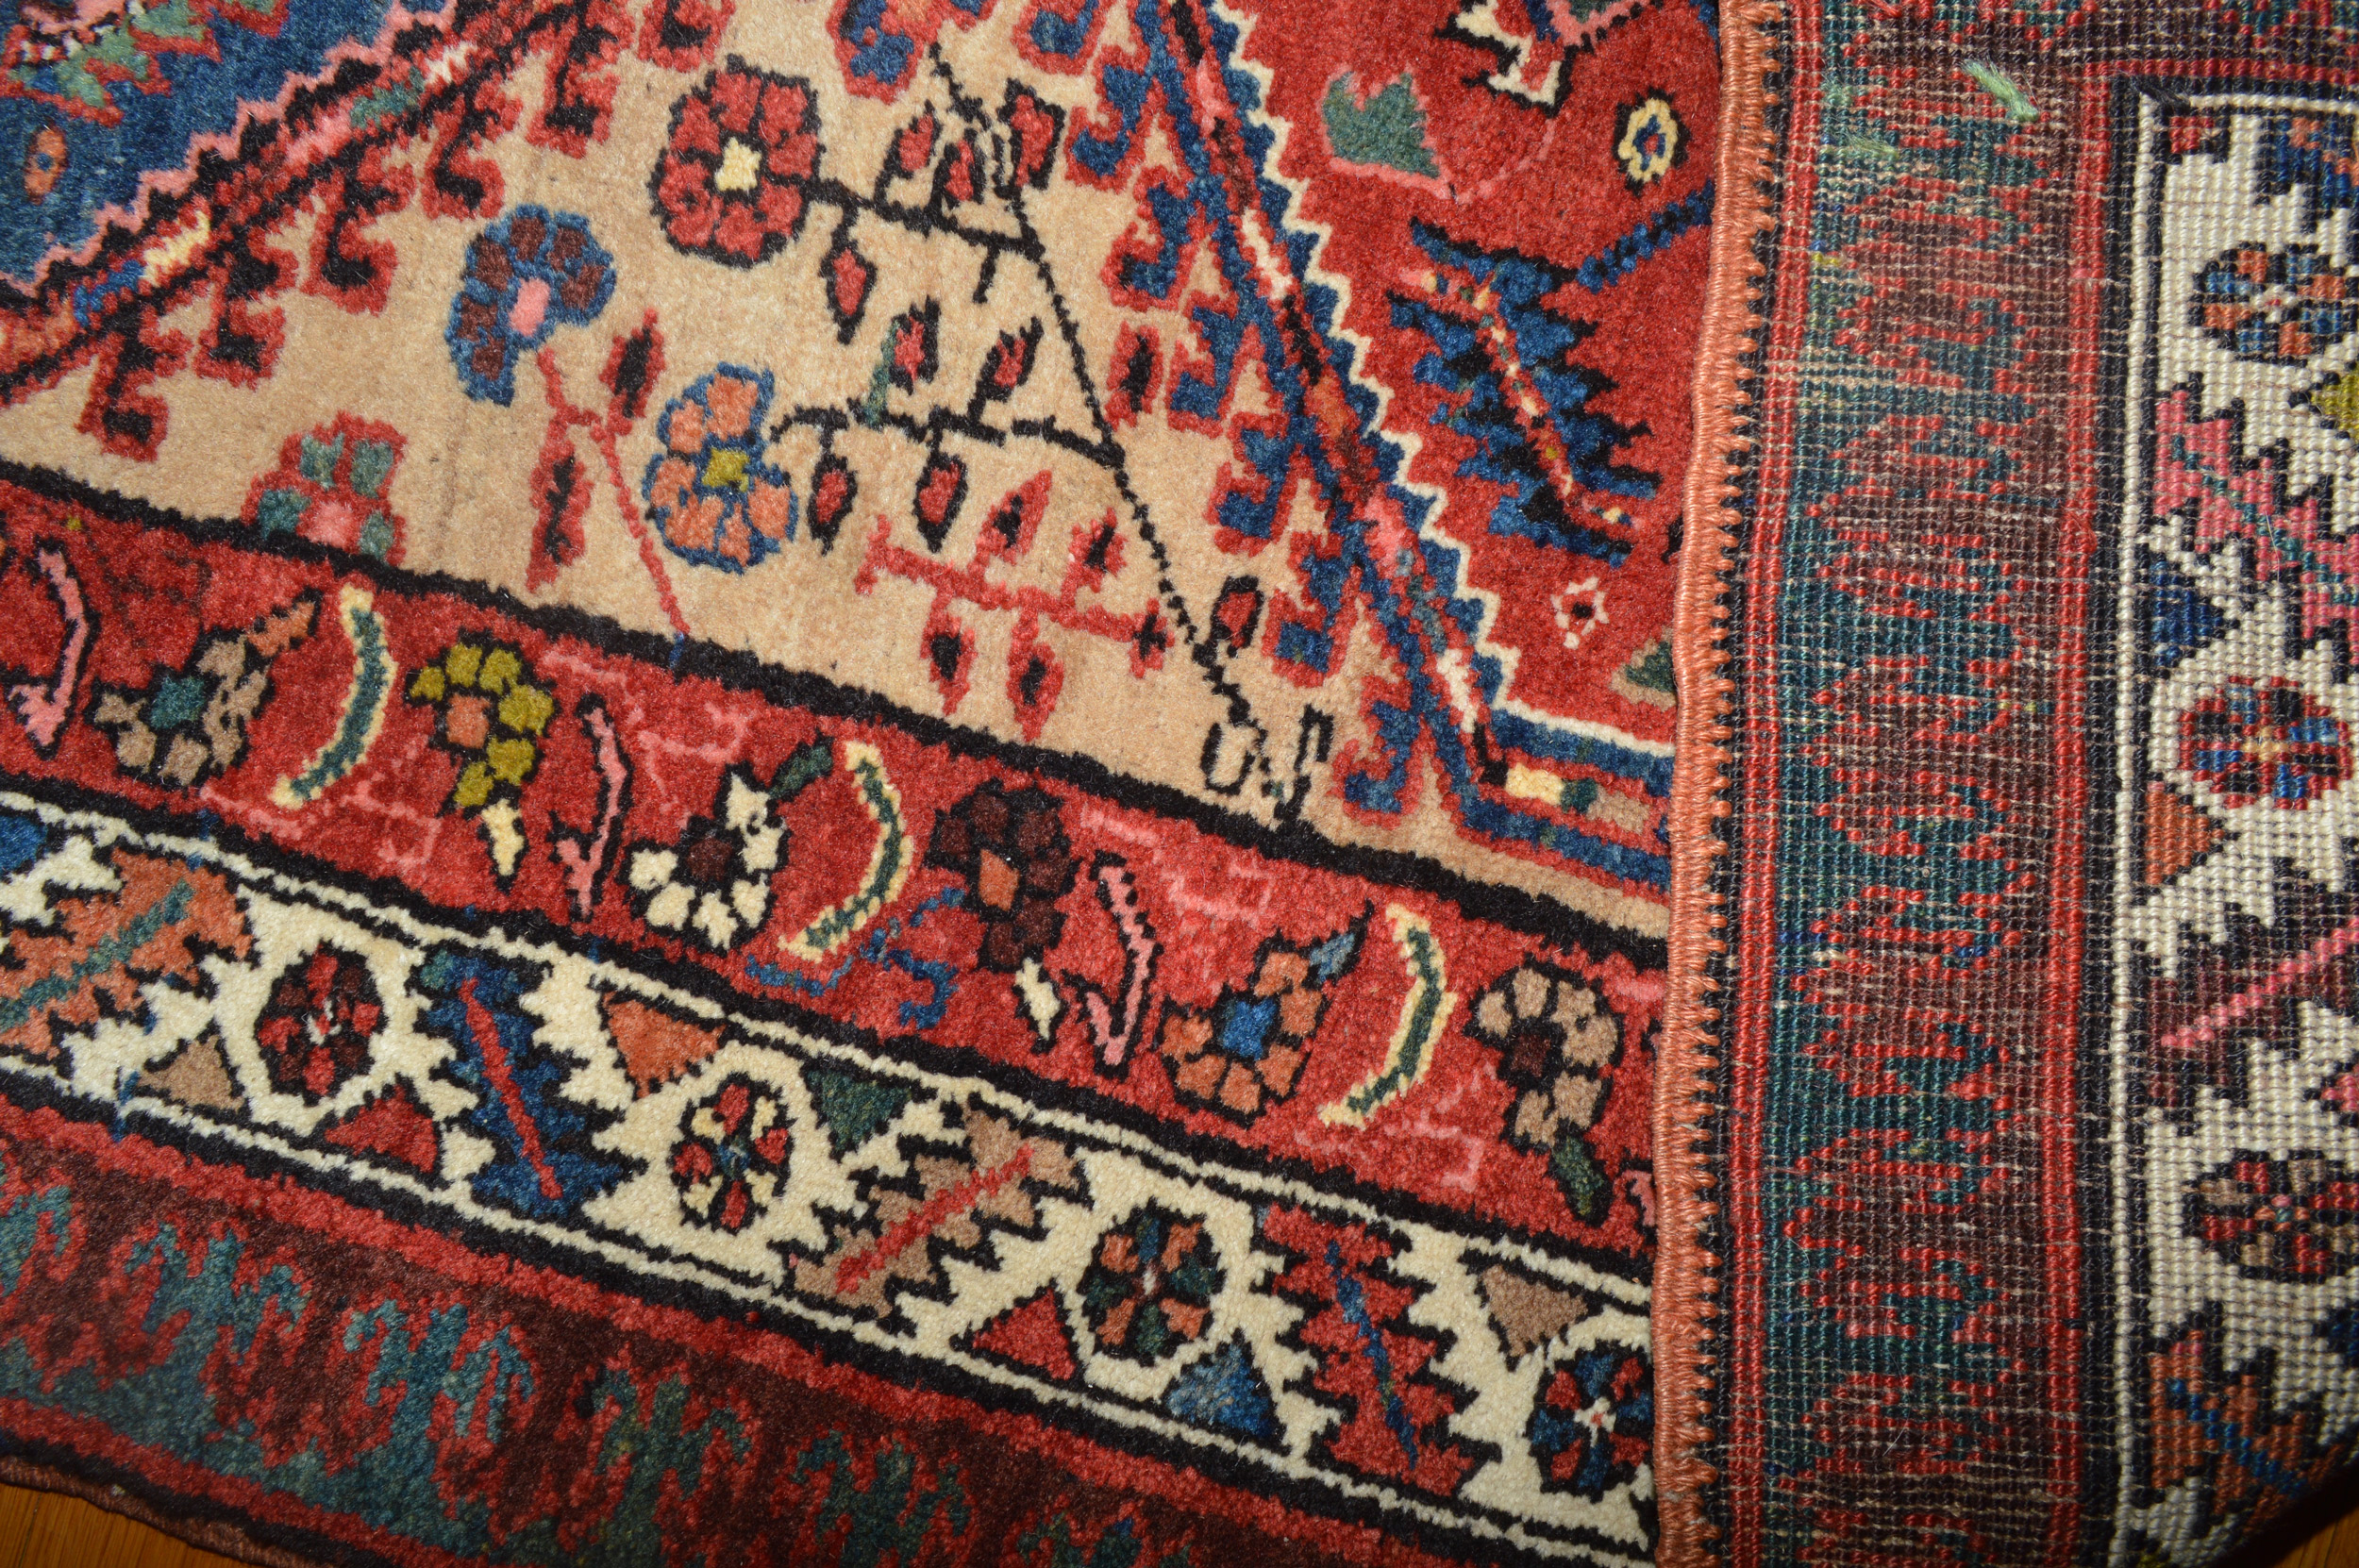 Detail of a charming antique Persian Serab rug with stylized flowers and three medallions on a light camel color field, Douglas Stock Gallery, antique Oriental rugs, antique runner rugs Boston,MA area